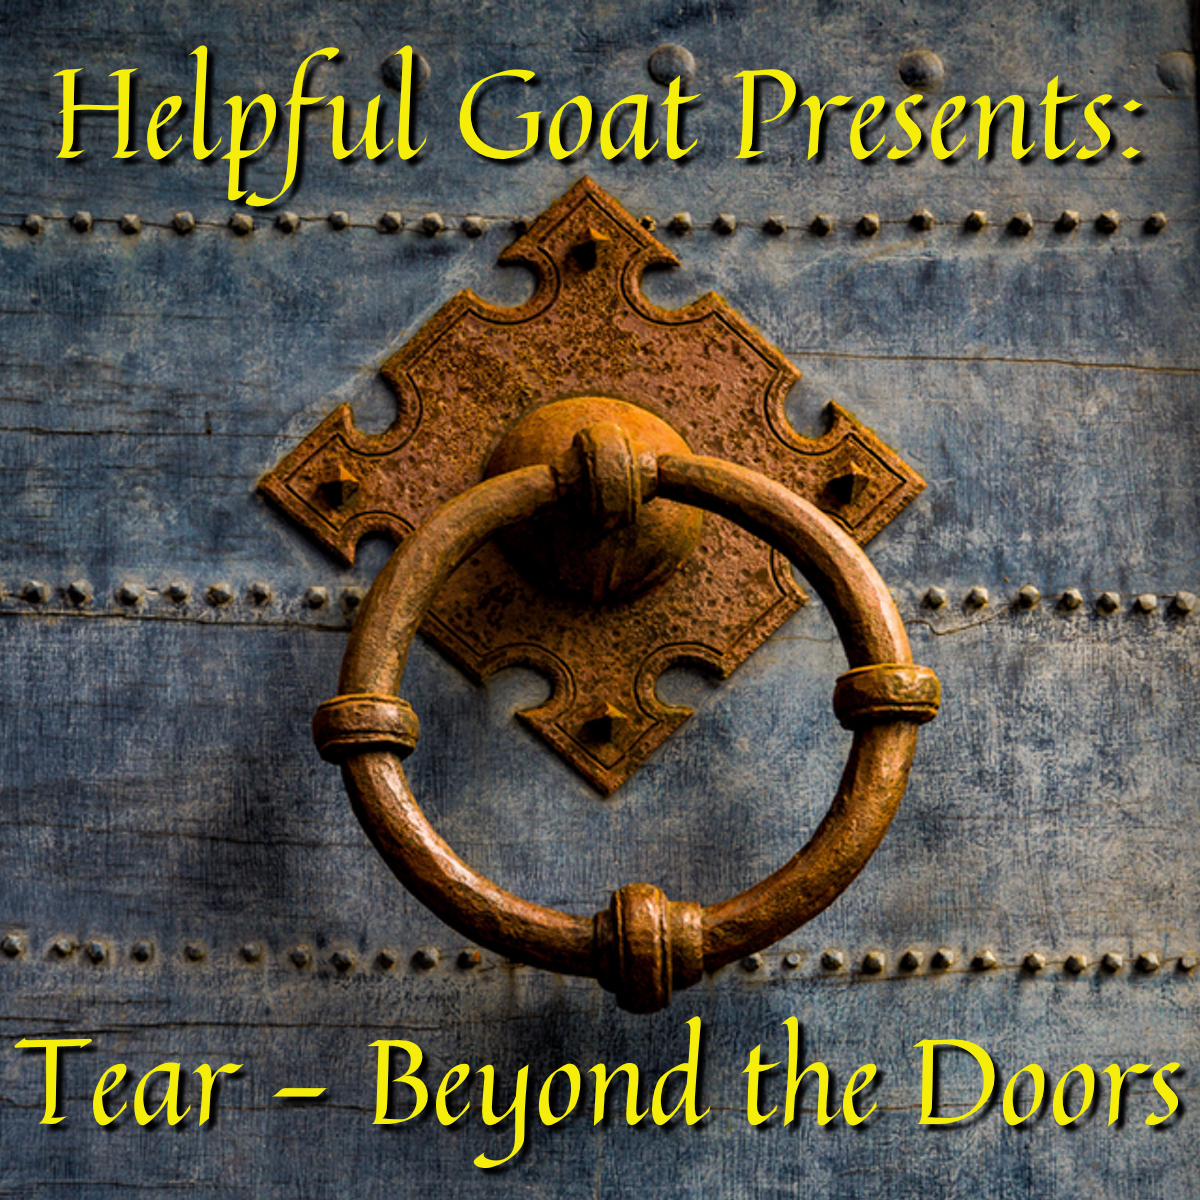 Tear: Beyond the Doors, Ep 18 - Adults Can Be Orphans Too